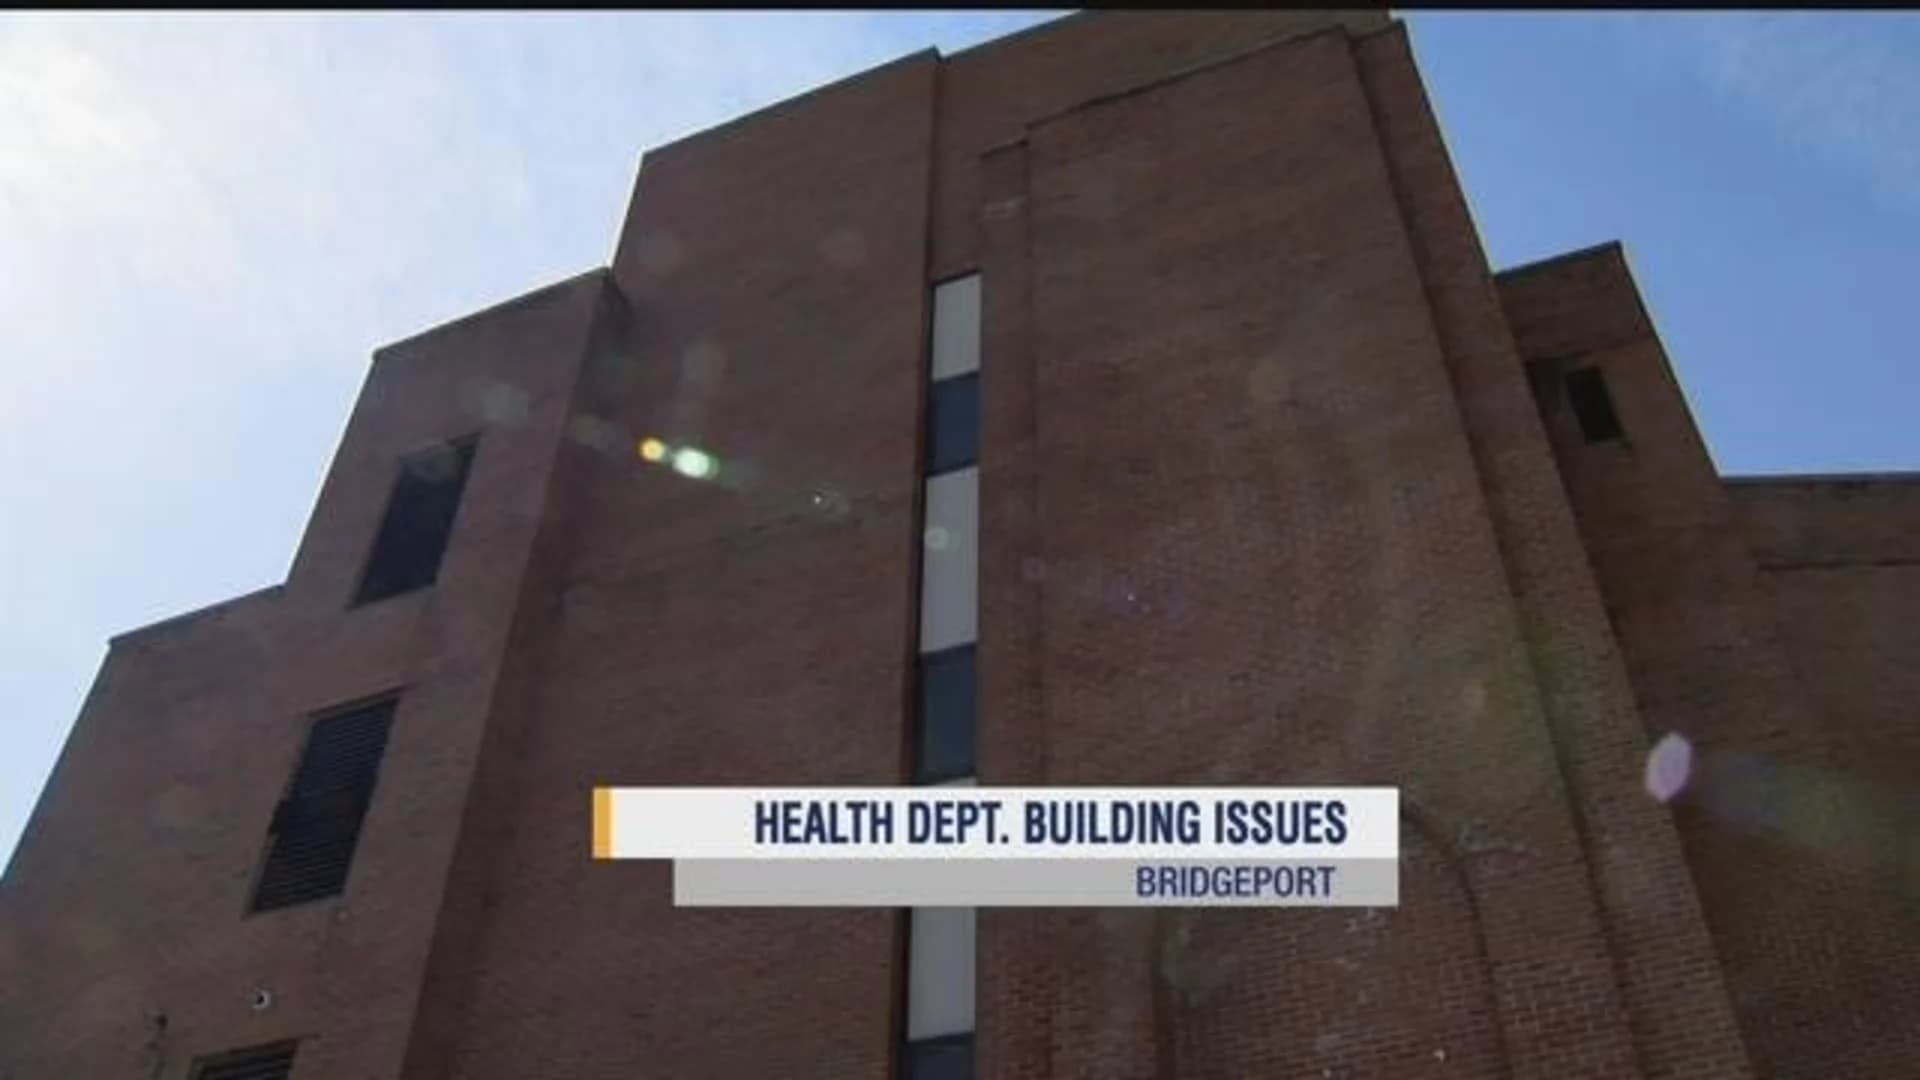 Veterans fear dispersal of services as Bridgeport Health Dept. HQ closes for repairs